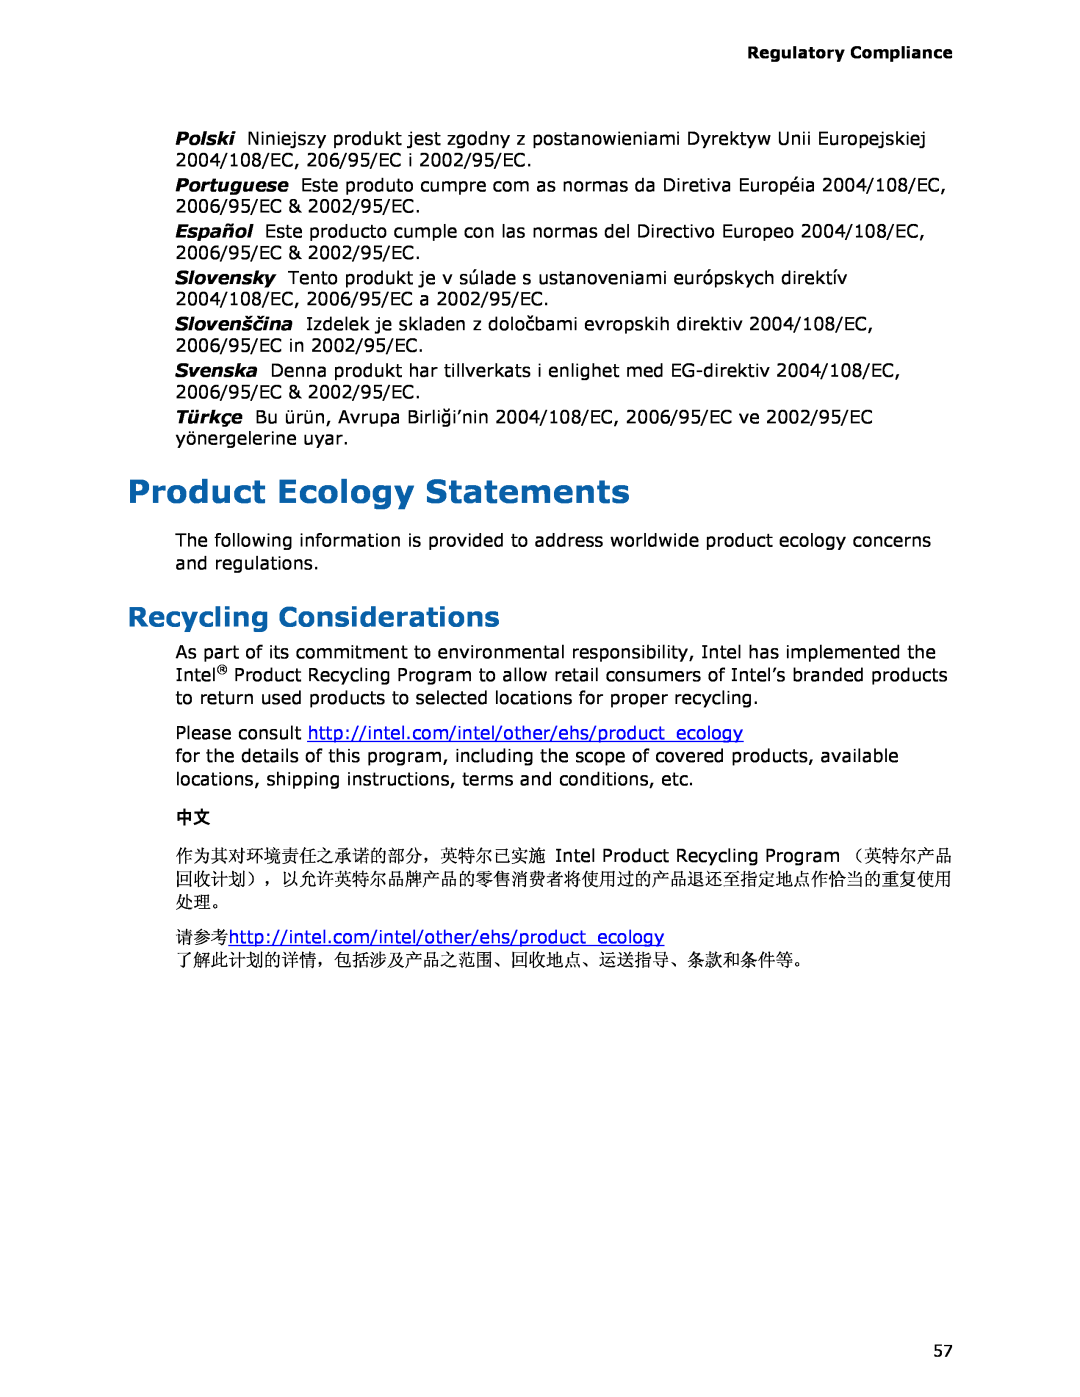 Intel BOXDH61AG Product Ecology Statements, Recycling Considerations, 请参考http//intel.com/intel/other/ehs/productecology 